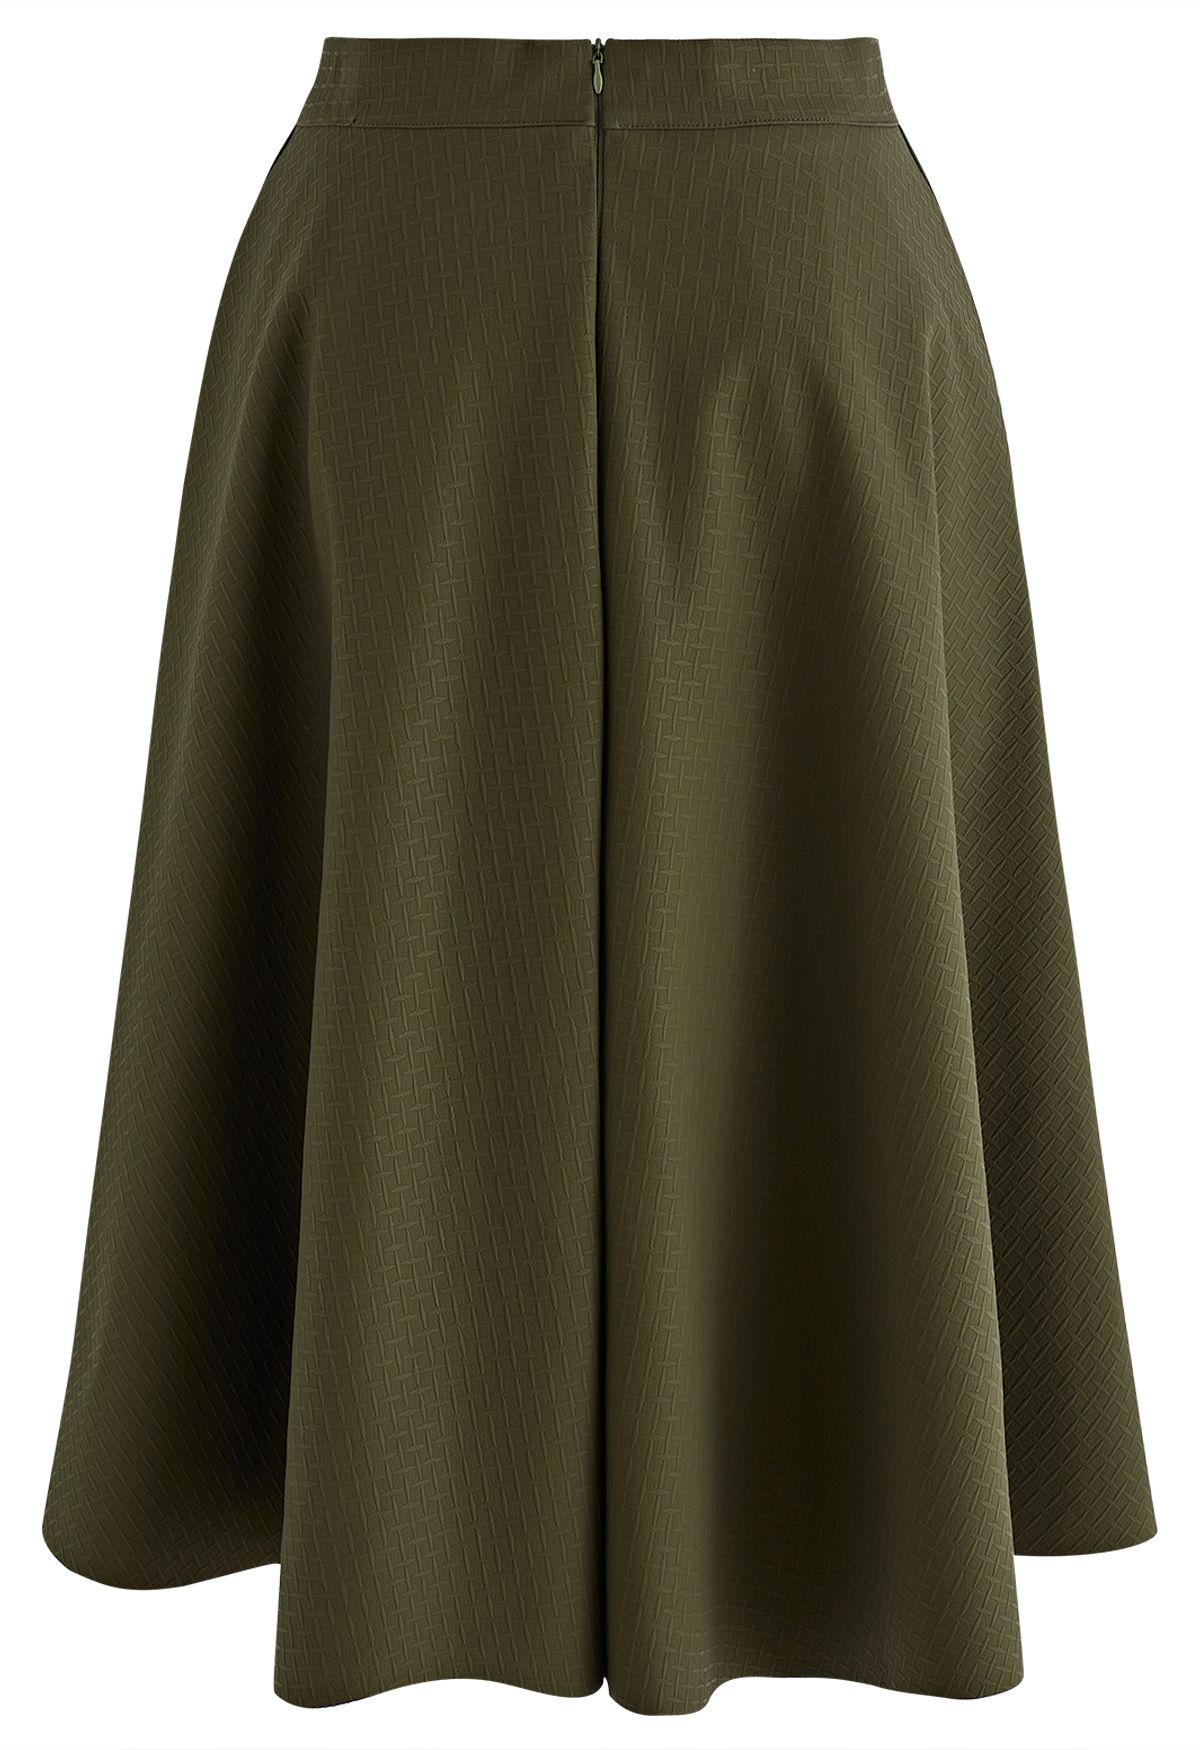 Faux Leather Textured Midi Skirt in Army Green